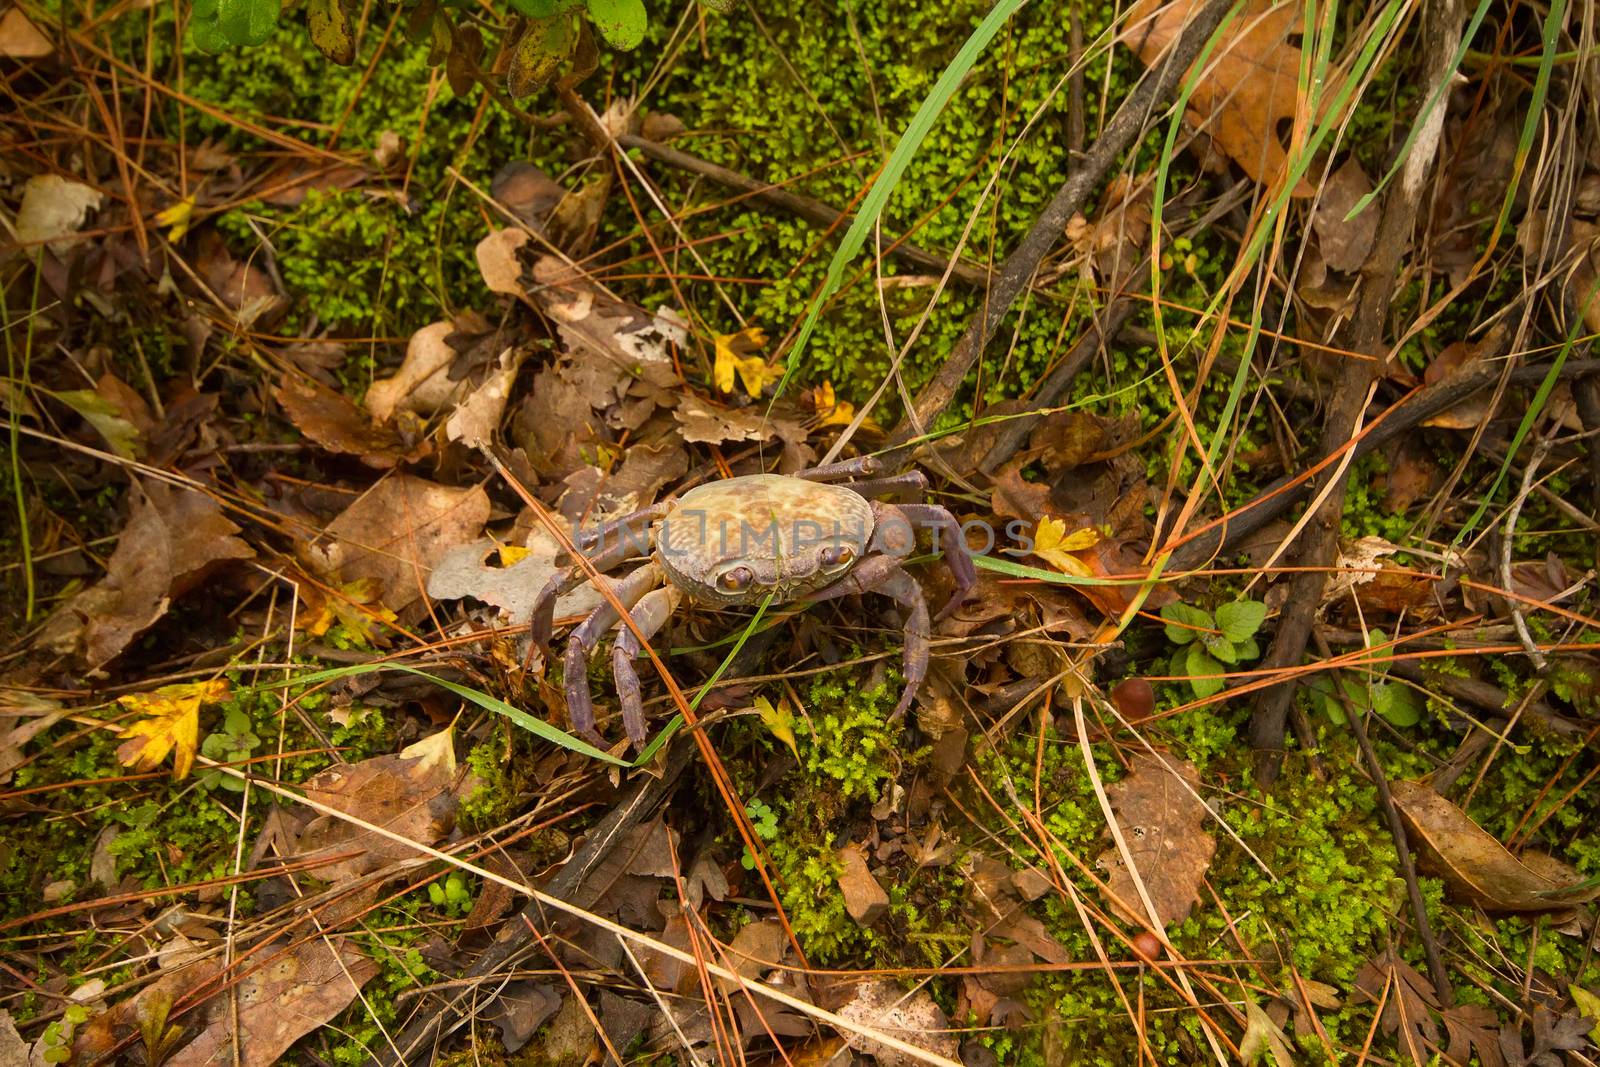 In the frame shown land crab closeup